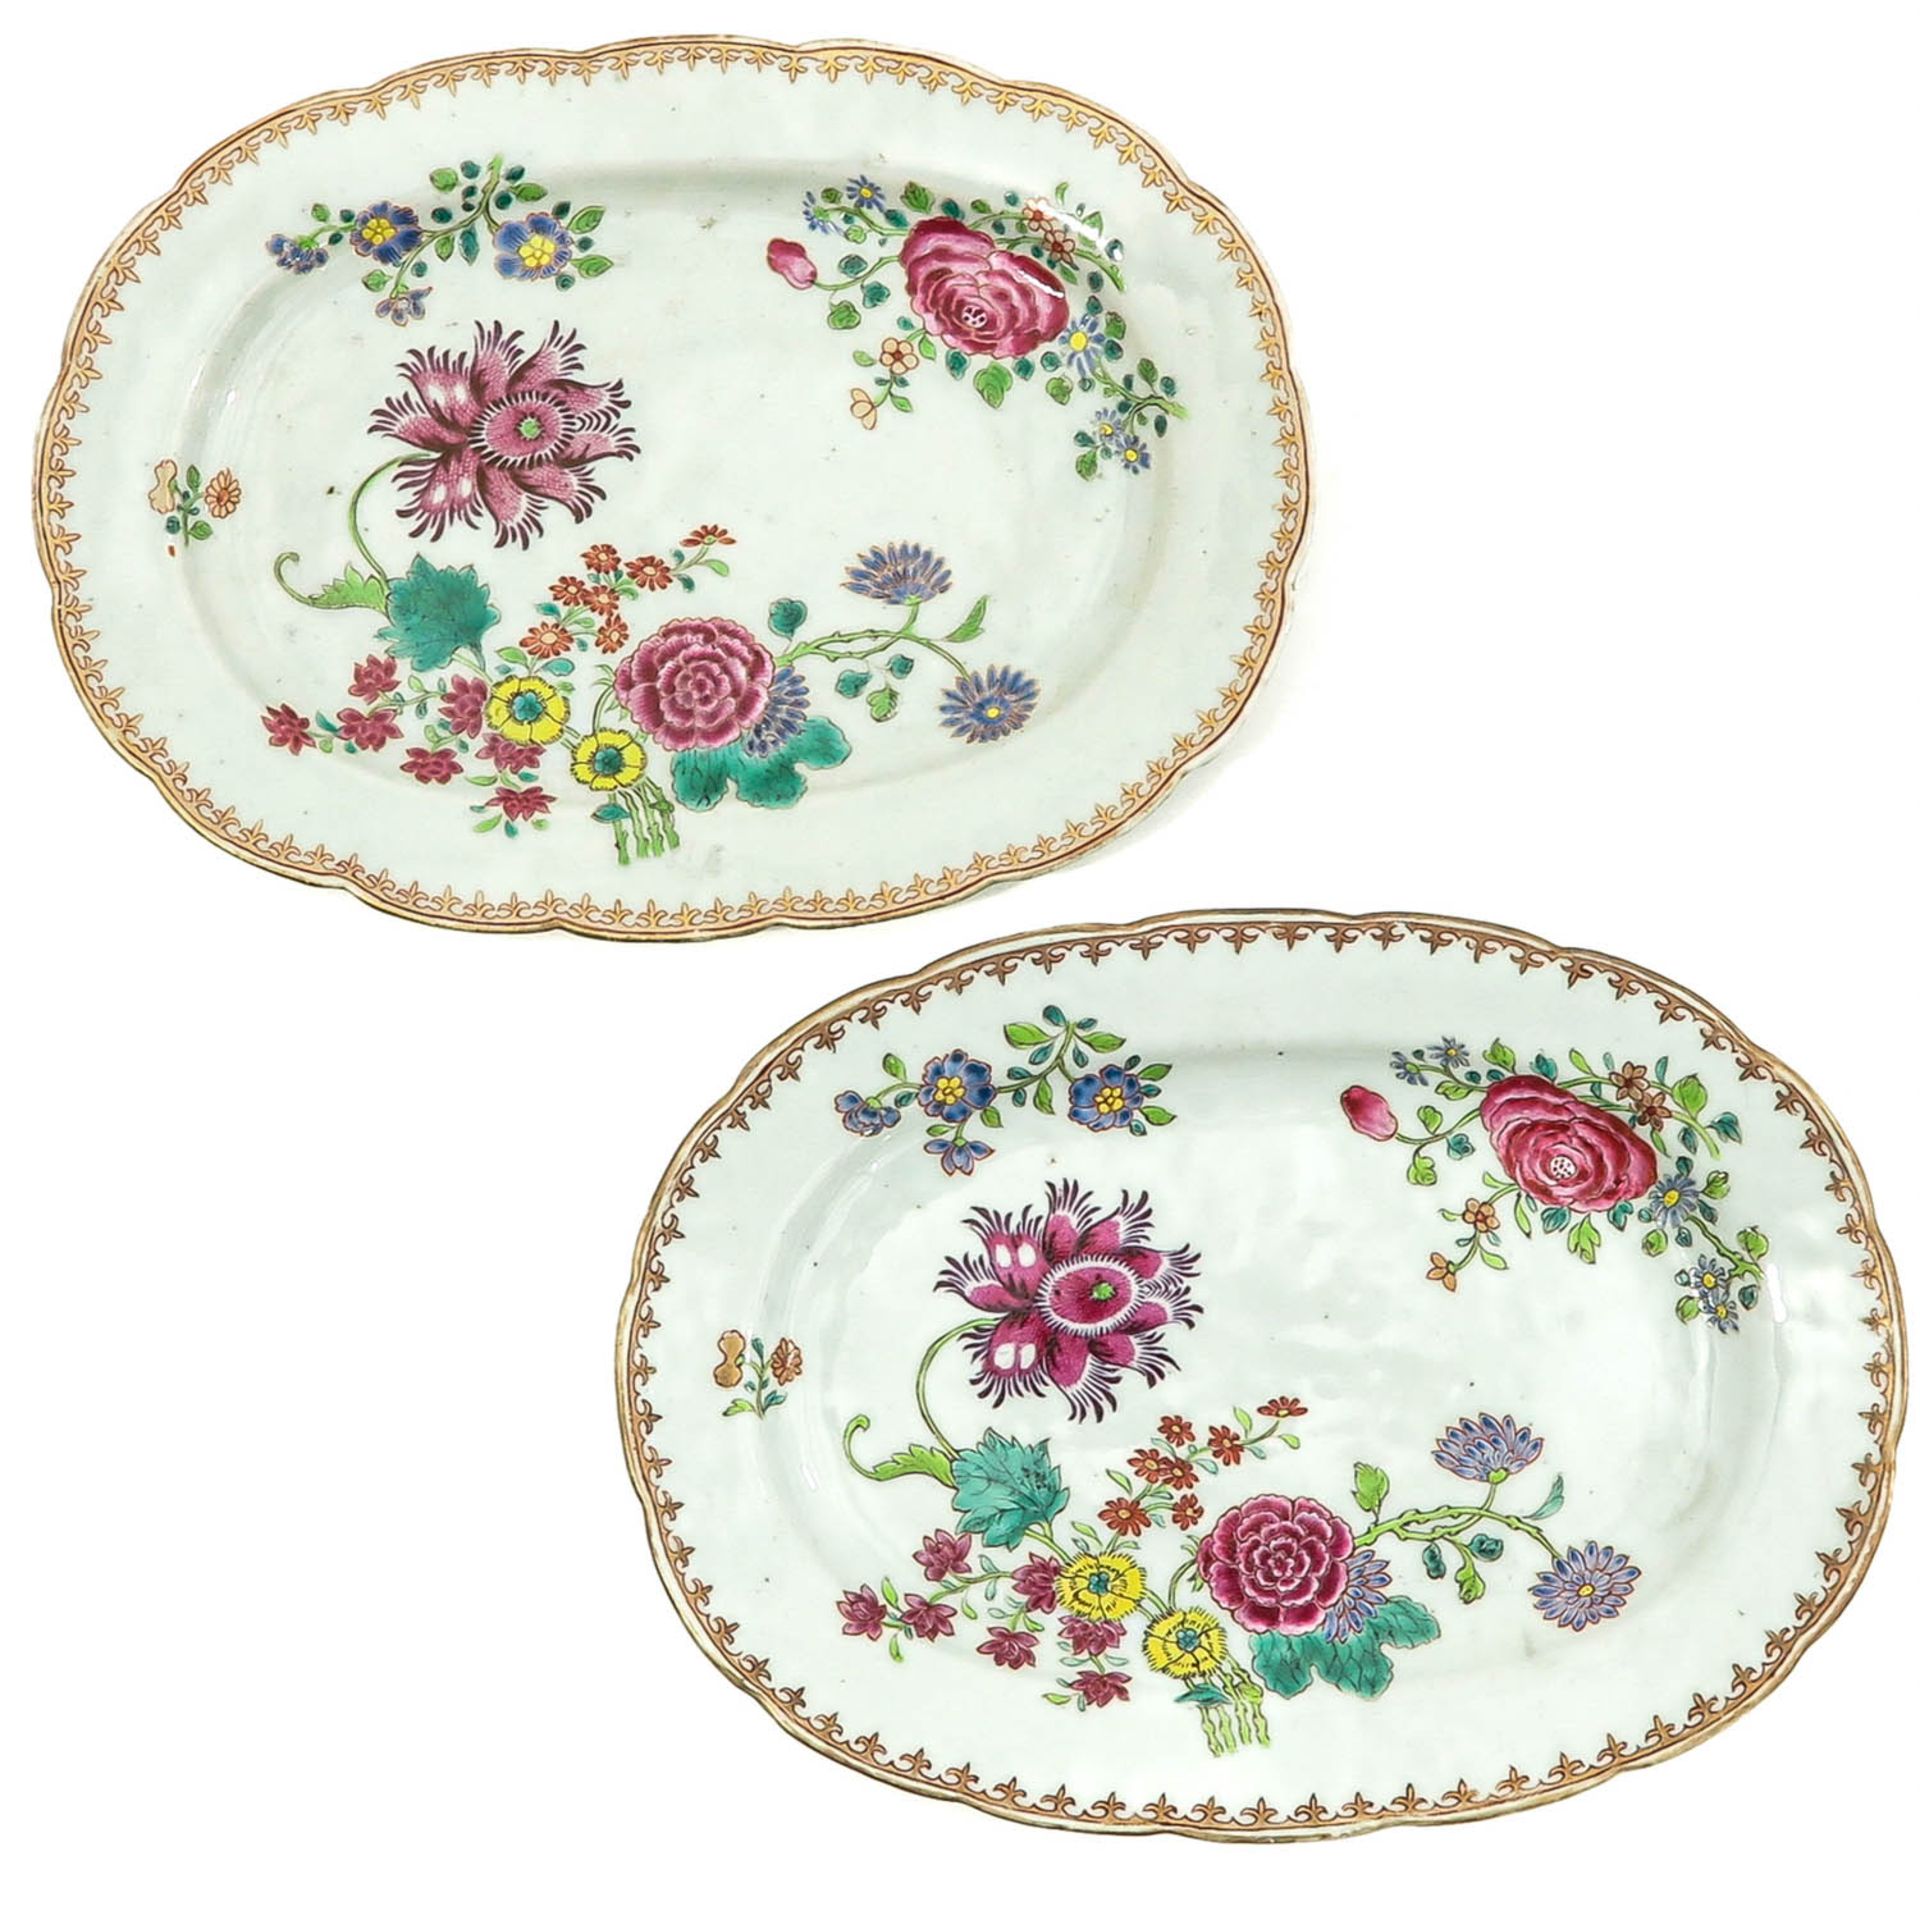 A Pair of Famille Rose Trays